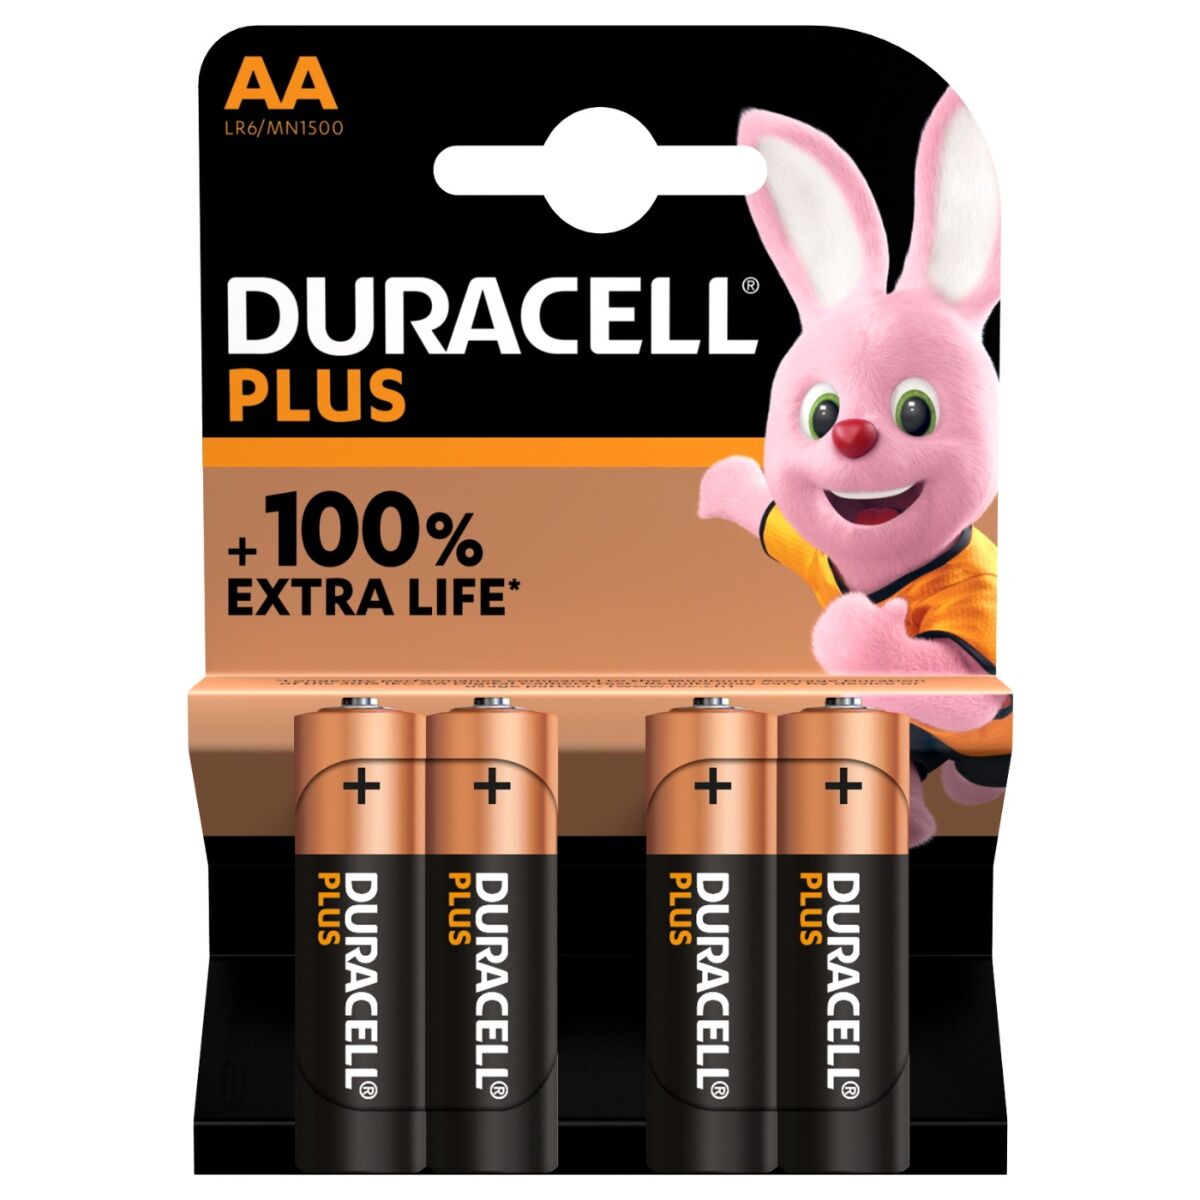 Duracell Plus AA Batteries 100% Extra Life MN1500 LR6 1.5V 4-Pack